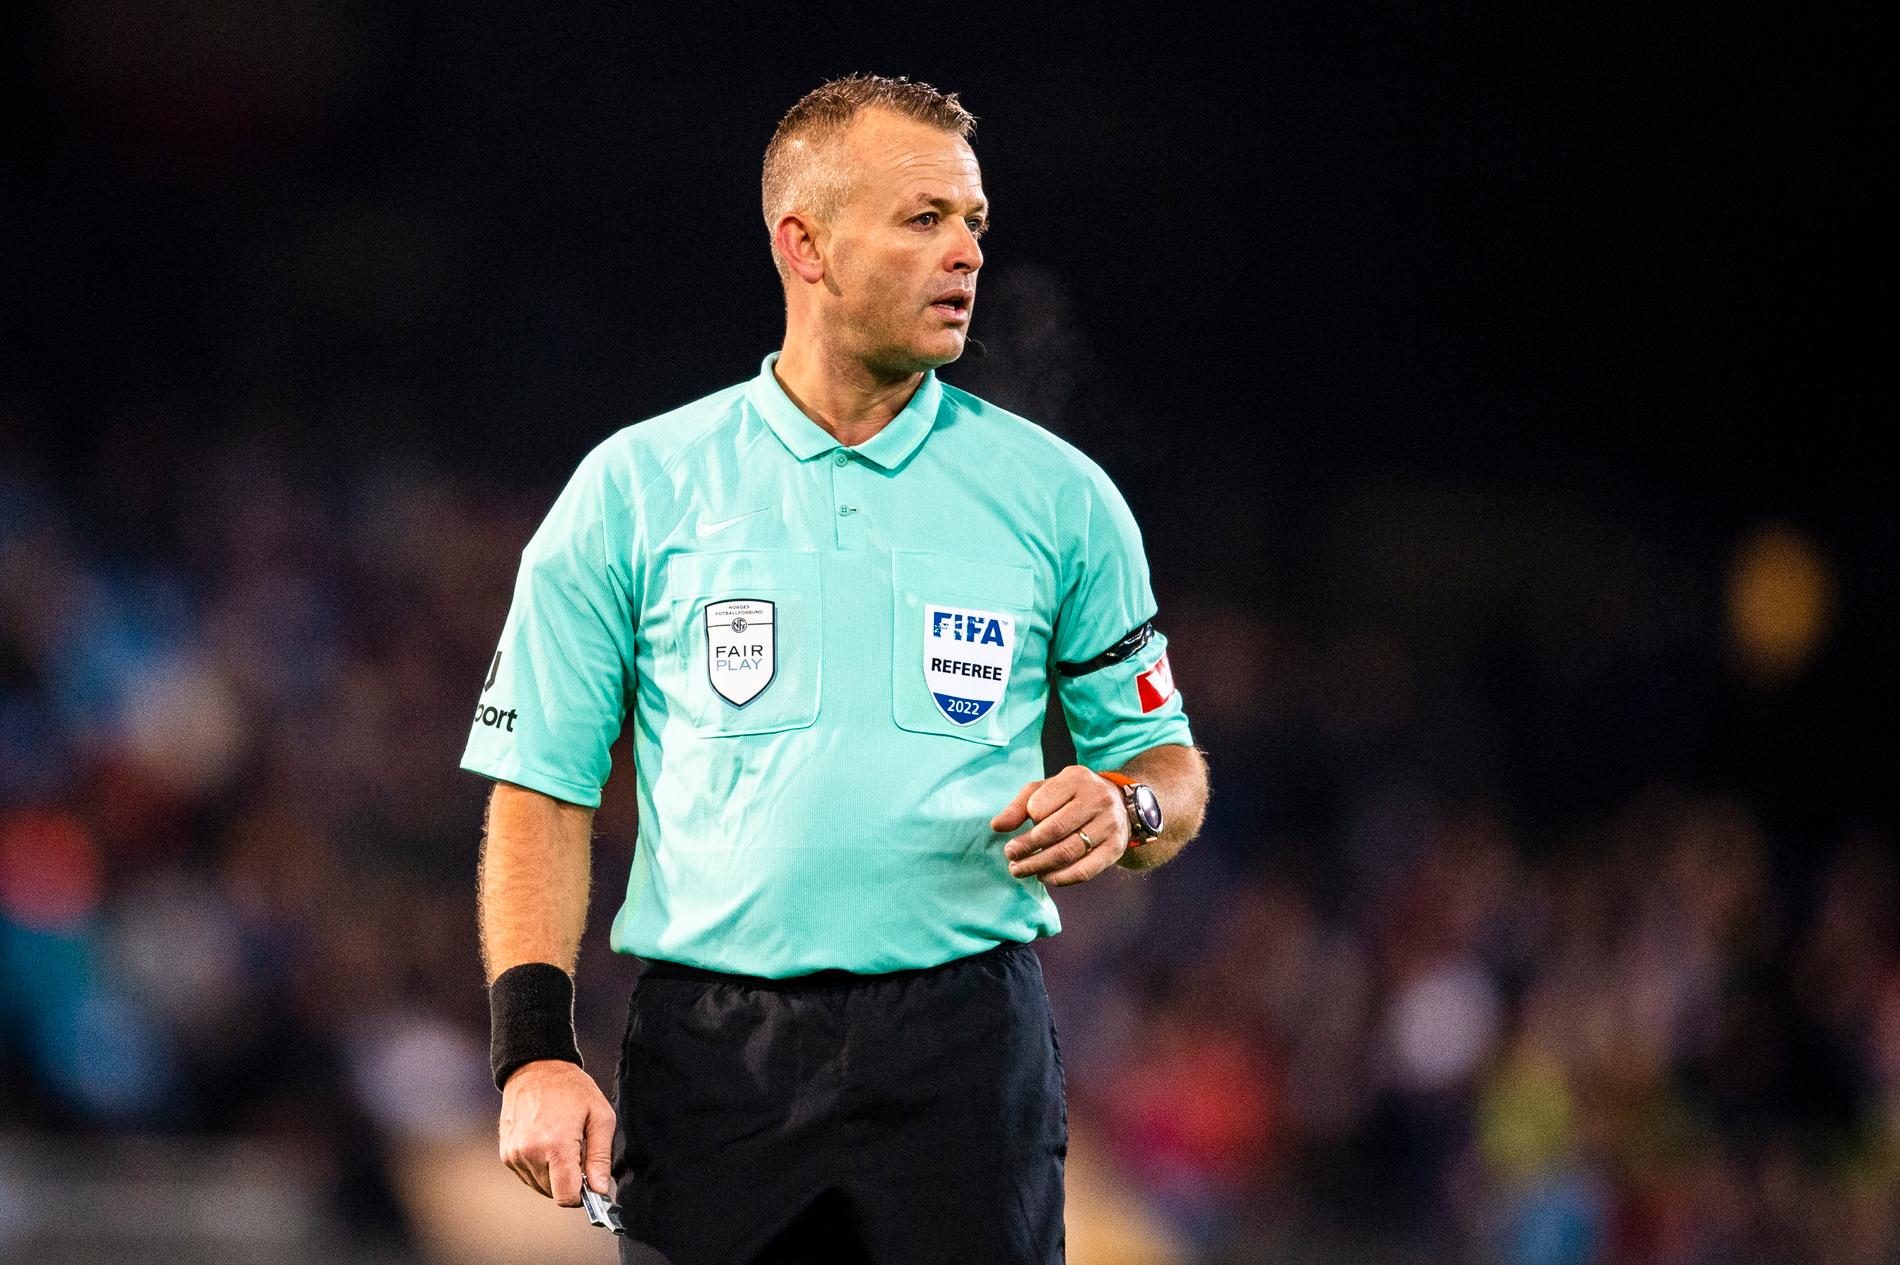 Football referee Moen has been sentenced to four months in prison